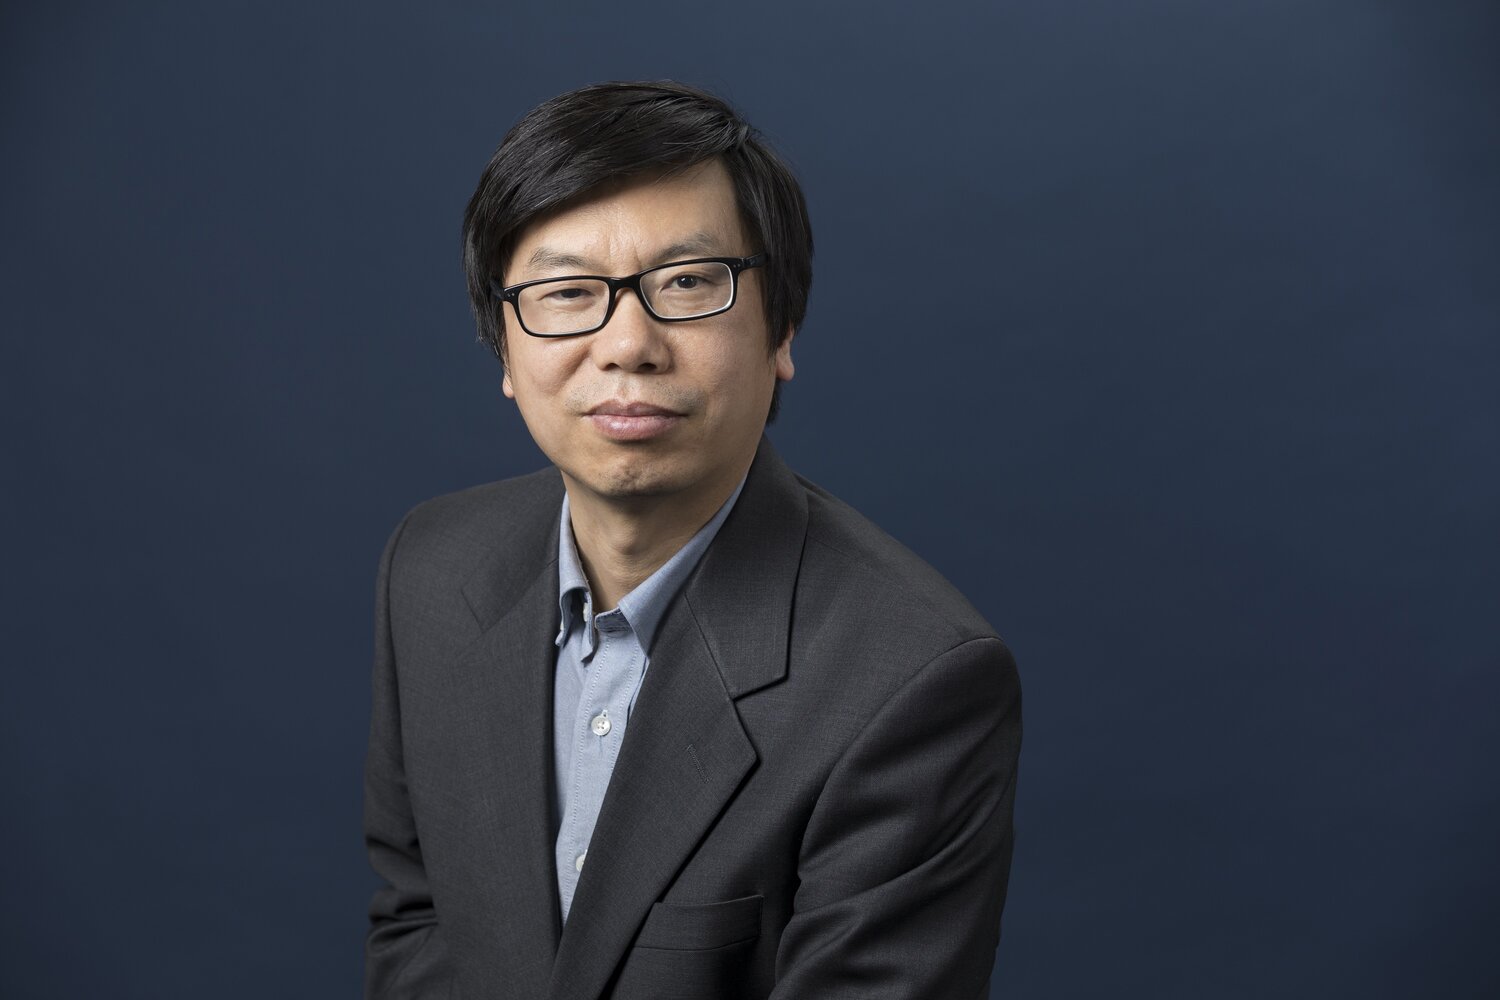 Professor Xu Bo: Director of Centre for Artificial Intelligence and Robotics, Hong Kong Institute of Science & Innovation, Chinese Academy of Sciences, President of Institute of Automation, Chinese Academy of Sciences.